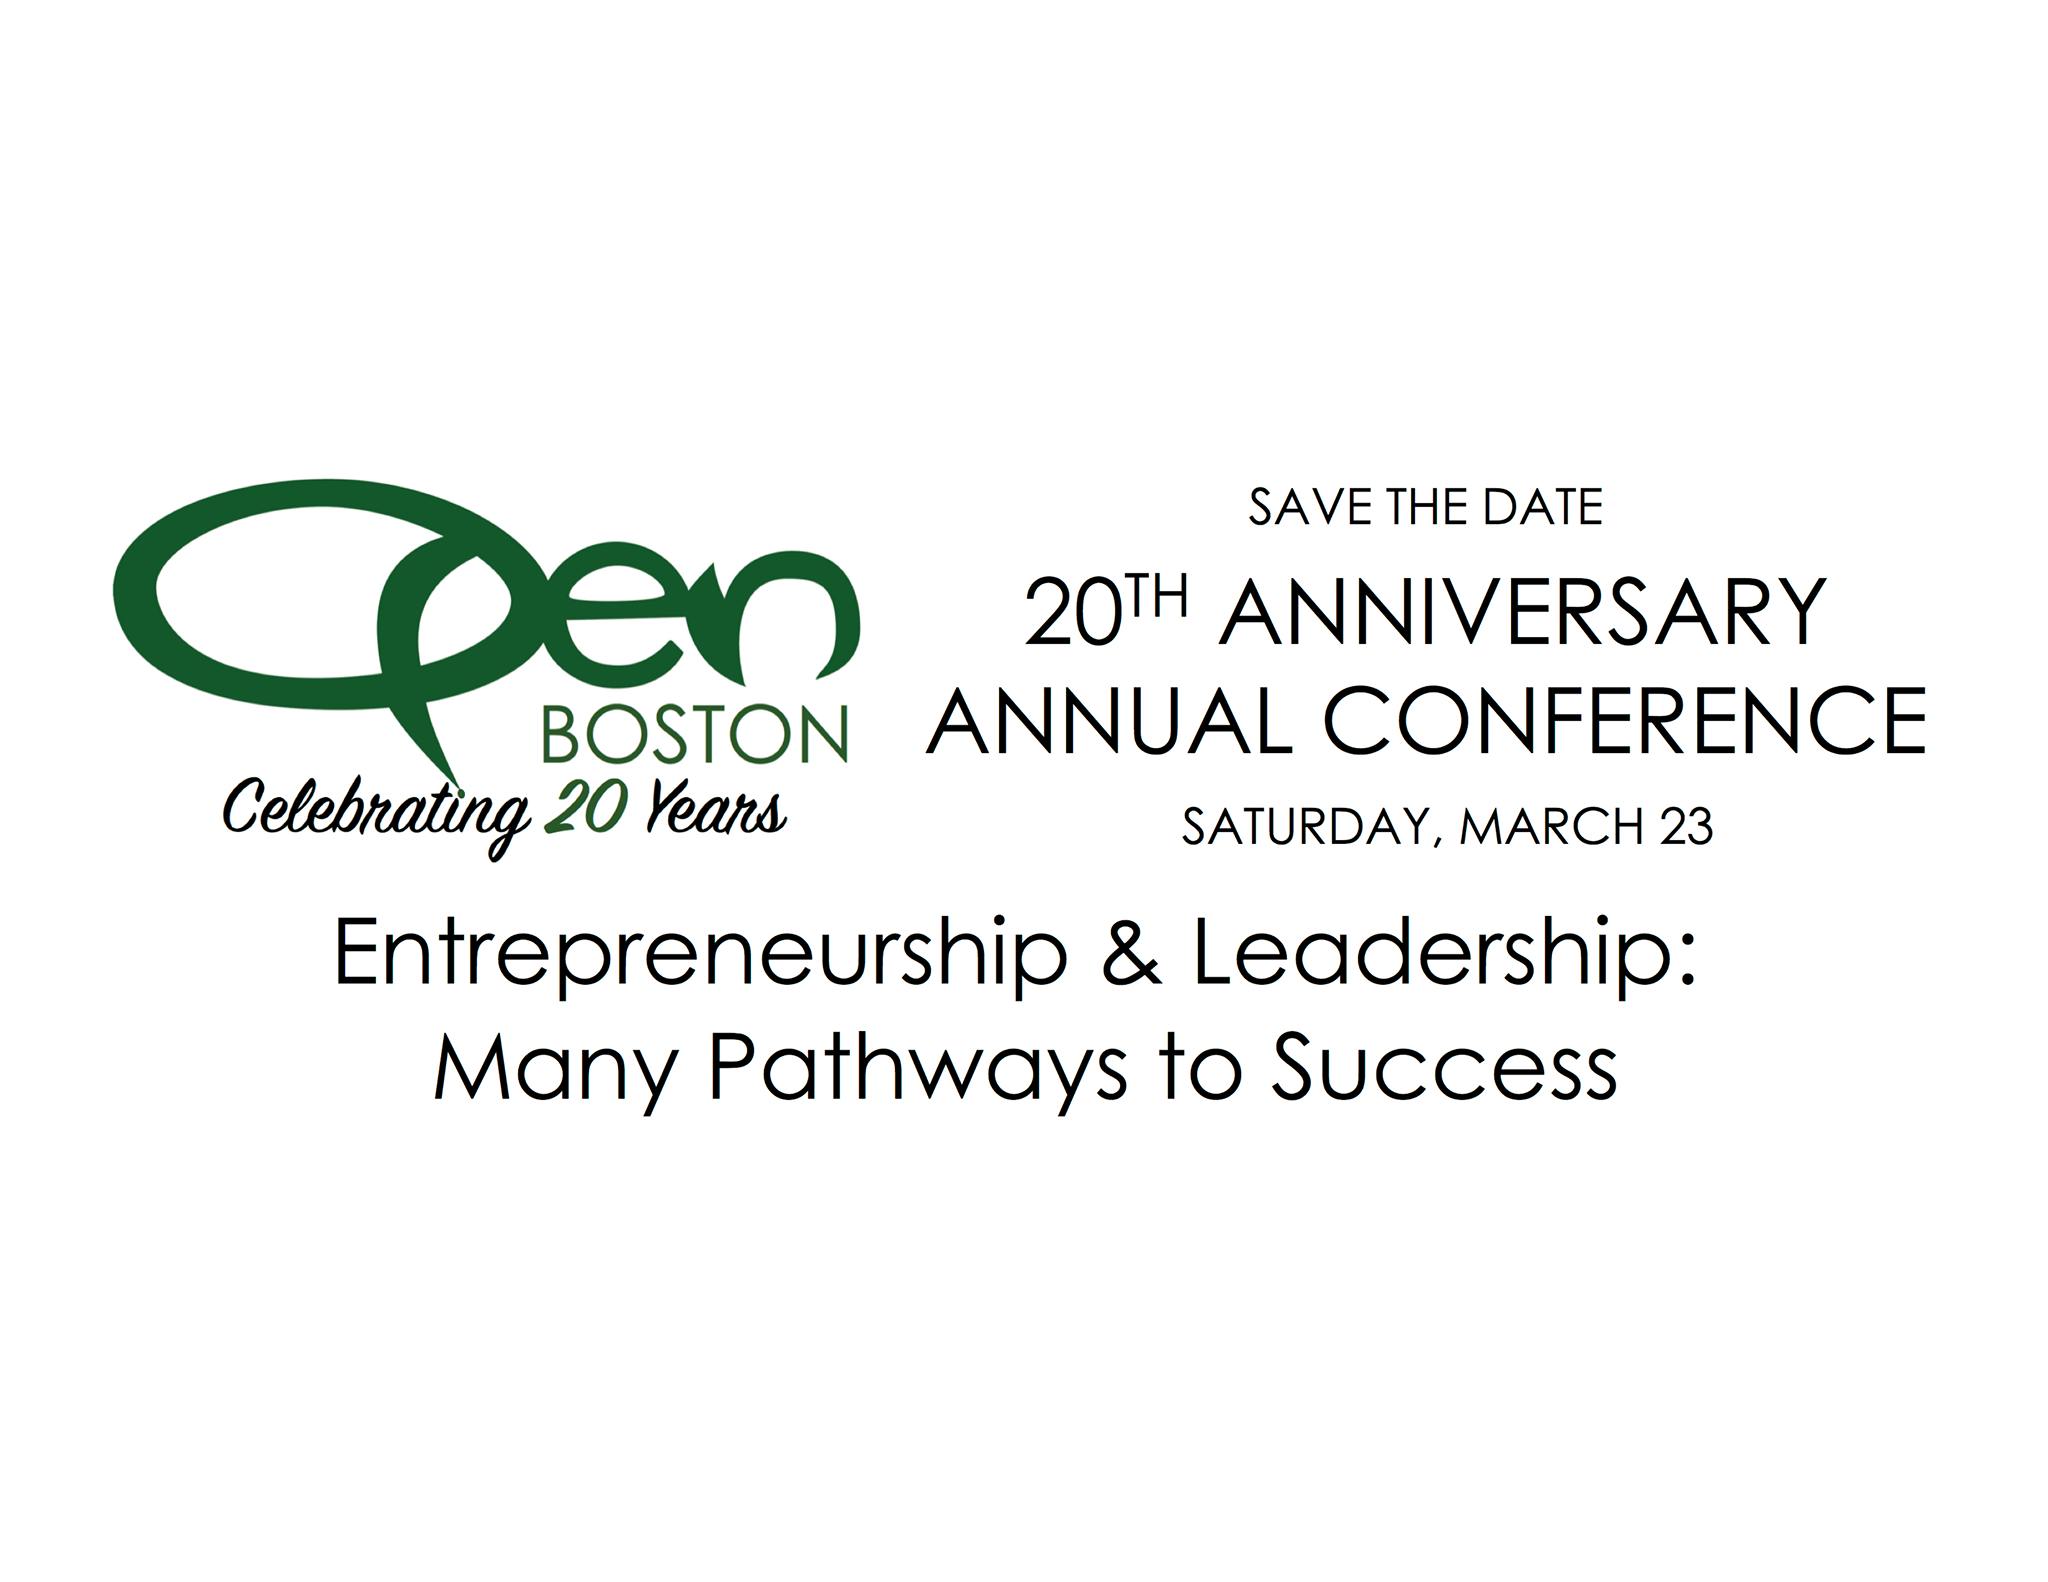 OPEN 20th Anniversary Conference: Entrepreneurship & Leadership - Many Pathways to Success